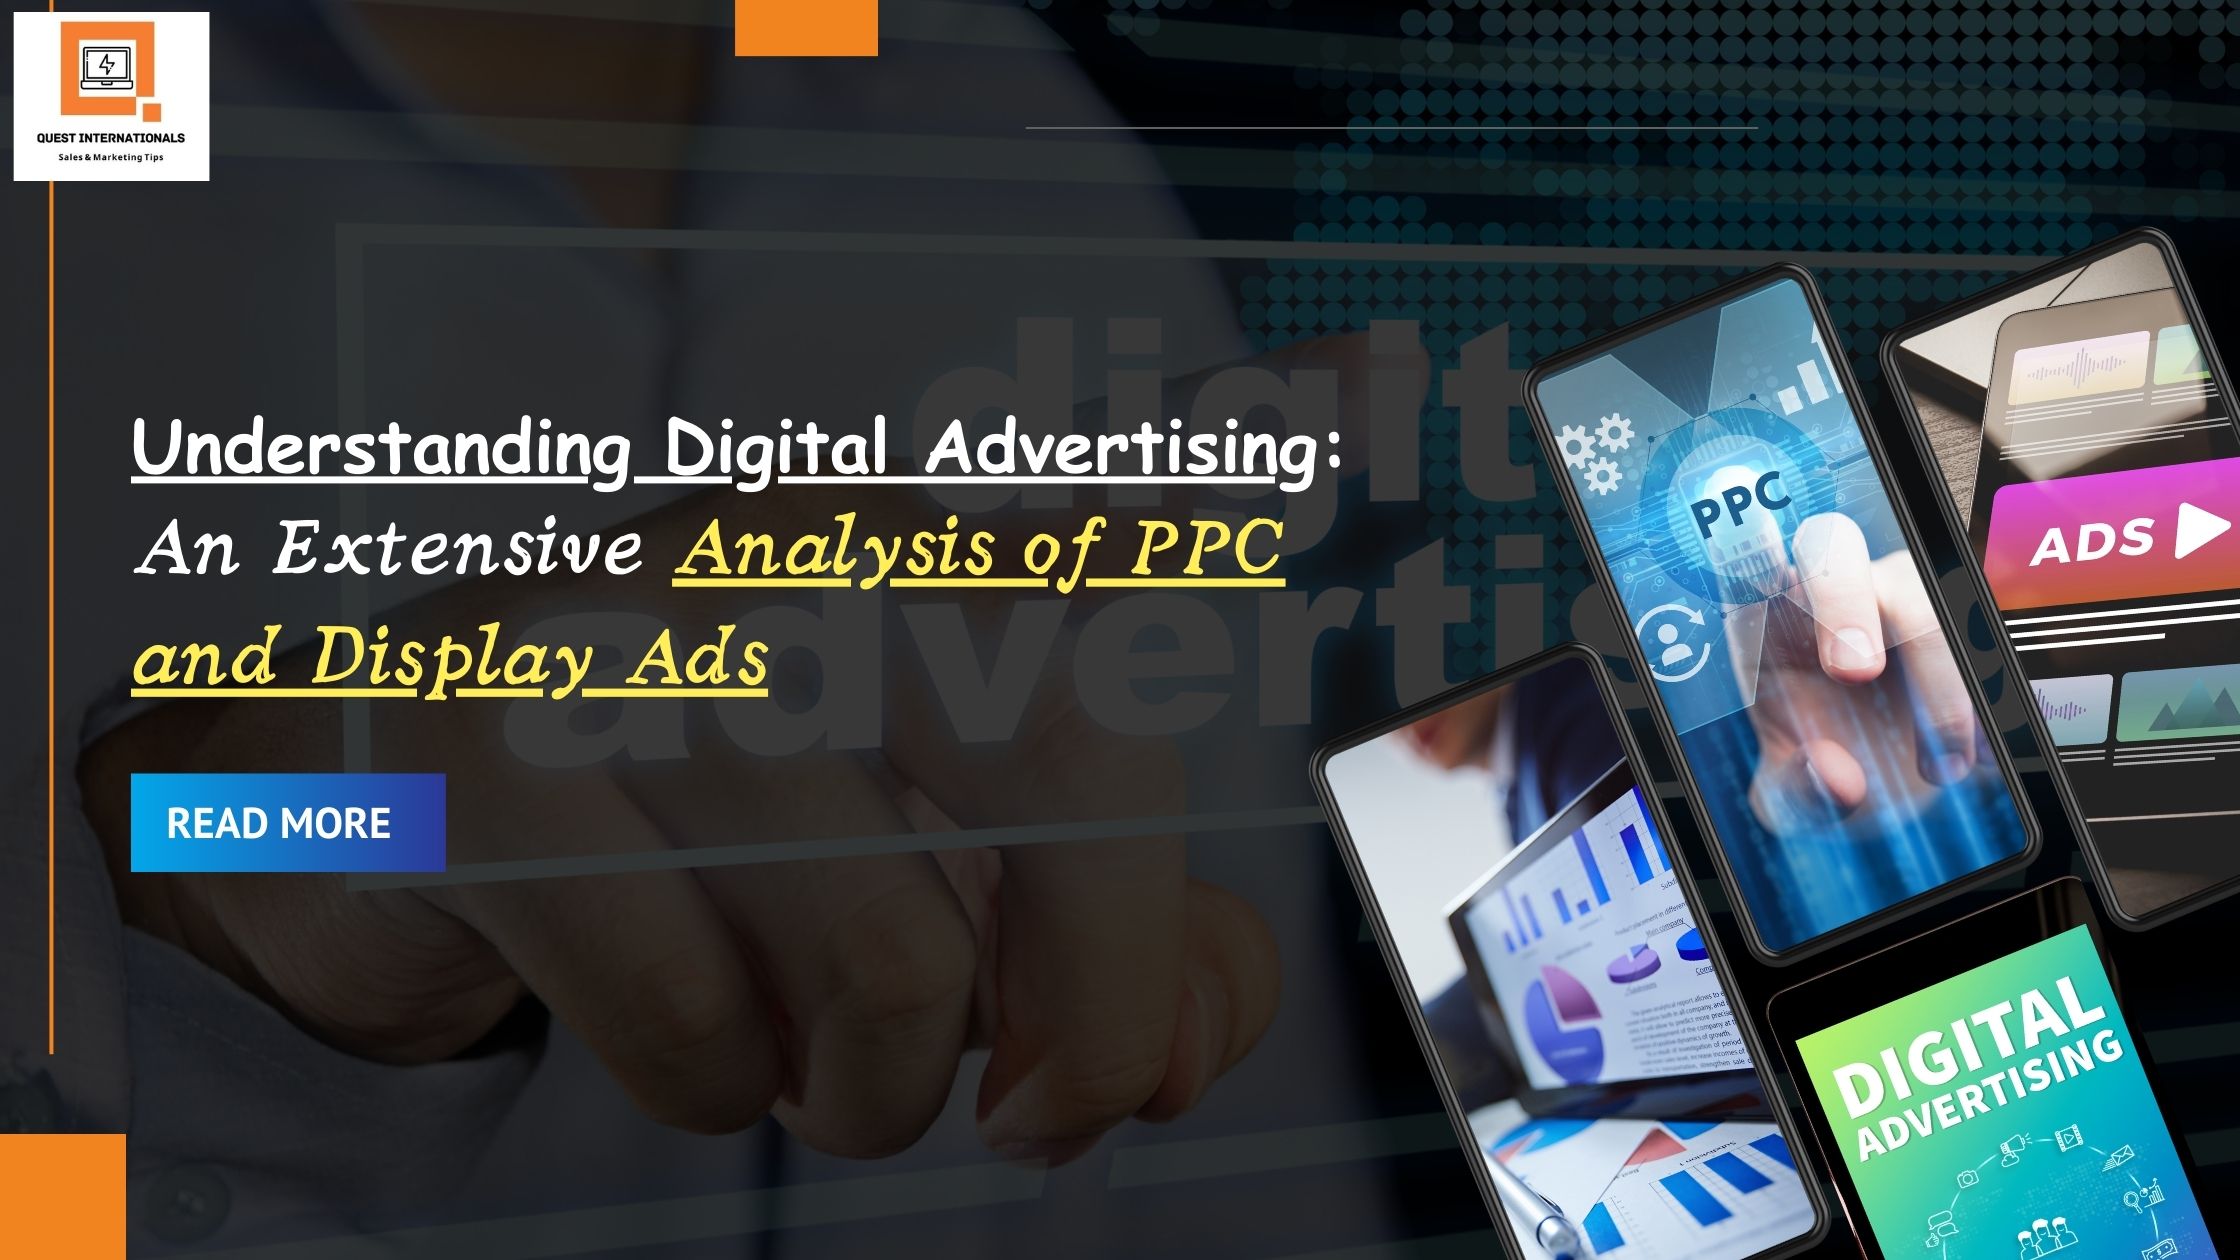 You are currently viewing Understanding Digital Advertising: An Extensive Analysis of PPC and Display Ads